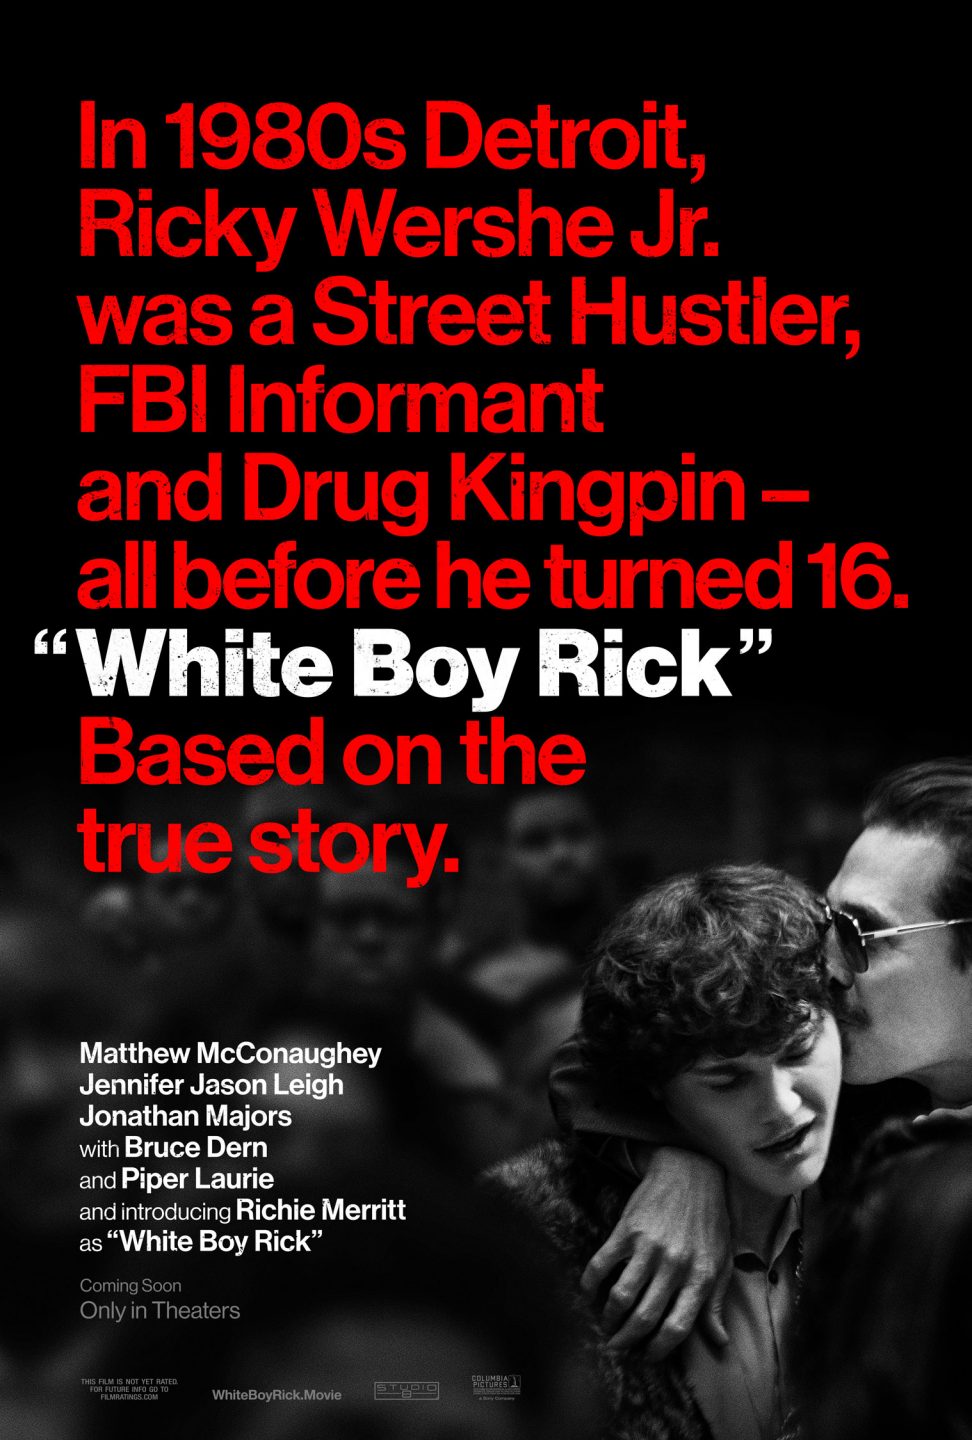 White Boy Rick poster (Sony Pictures)